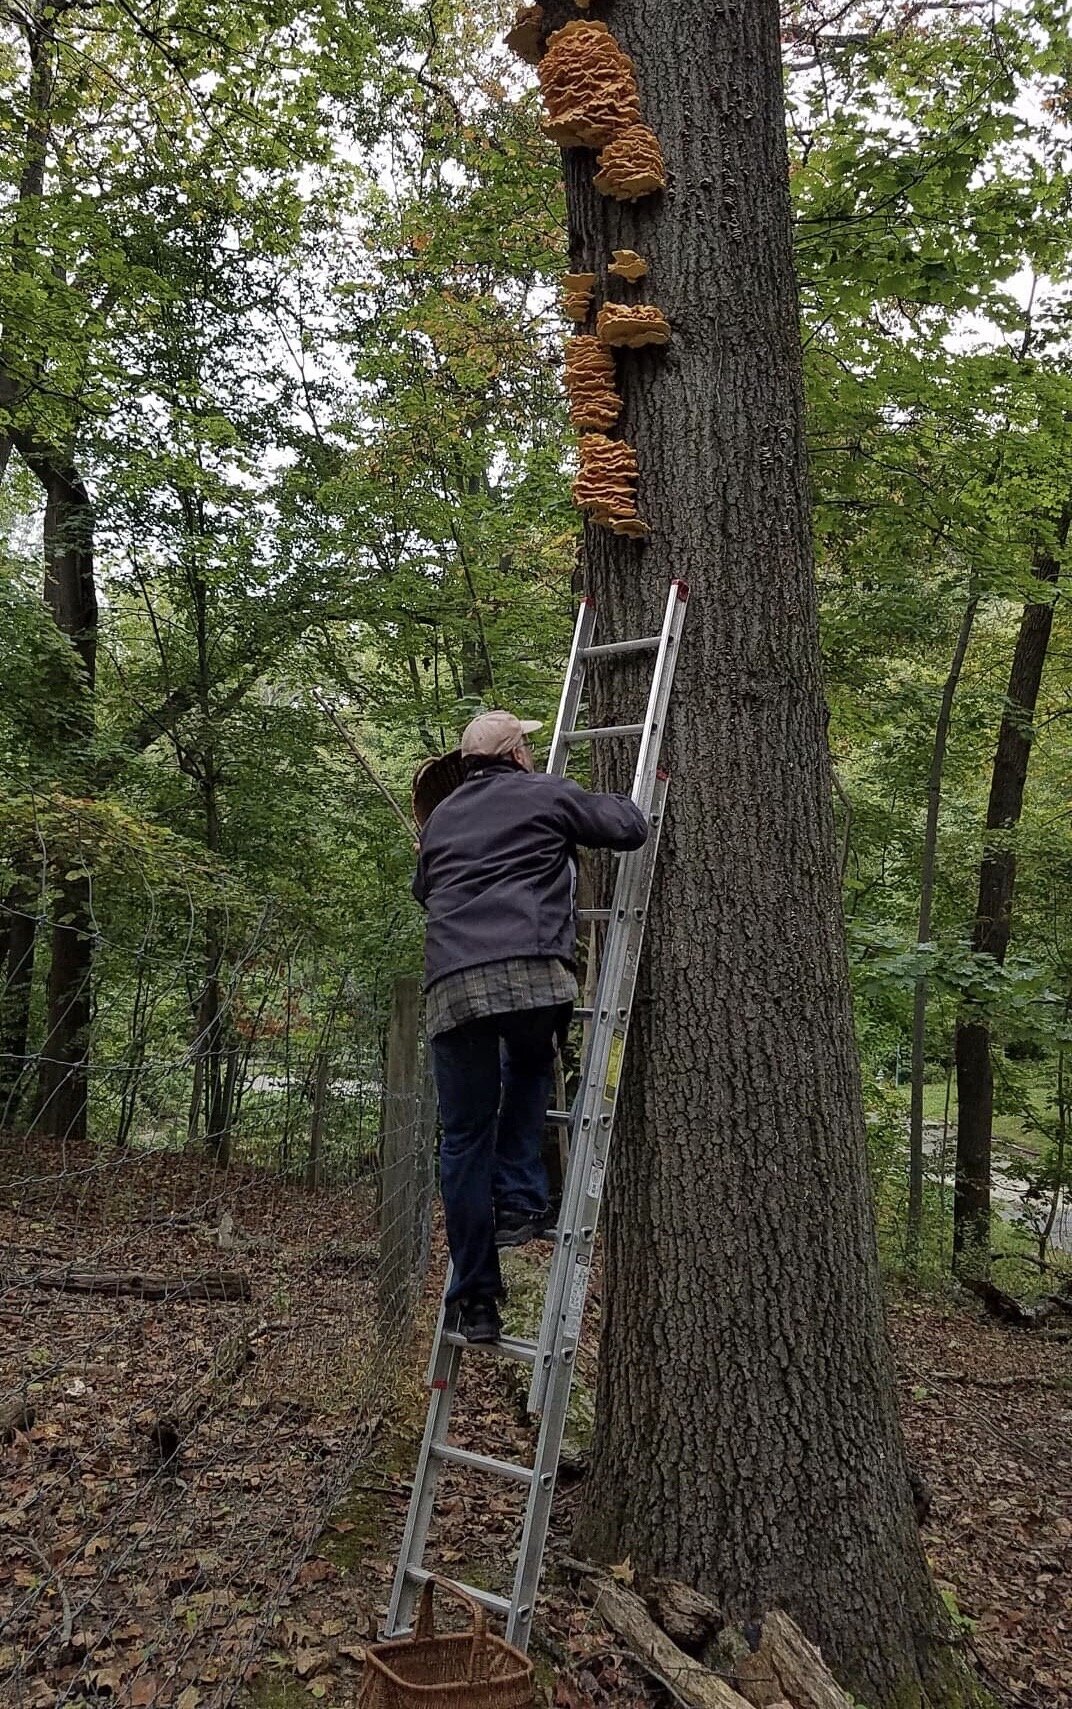 A person climbing a ladder leaned up on a tree with mushrooms growing from bark